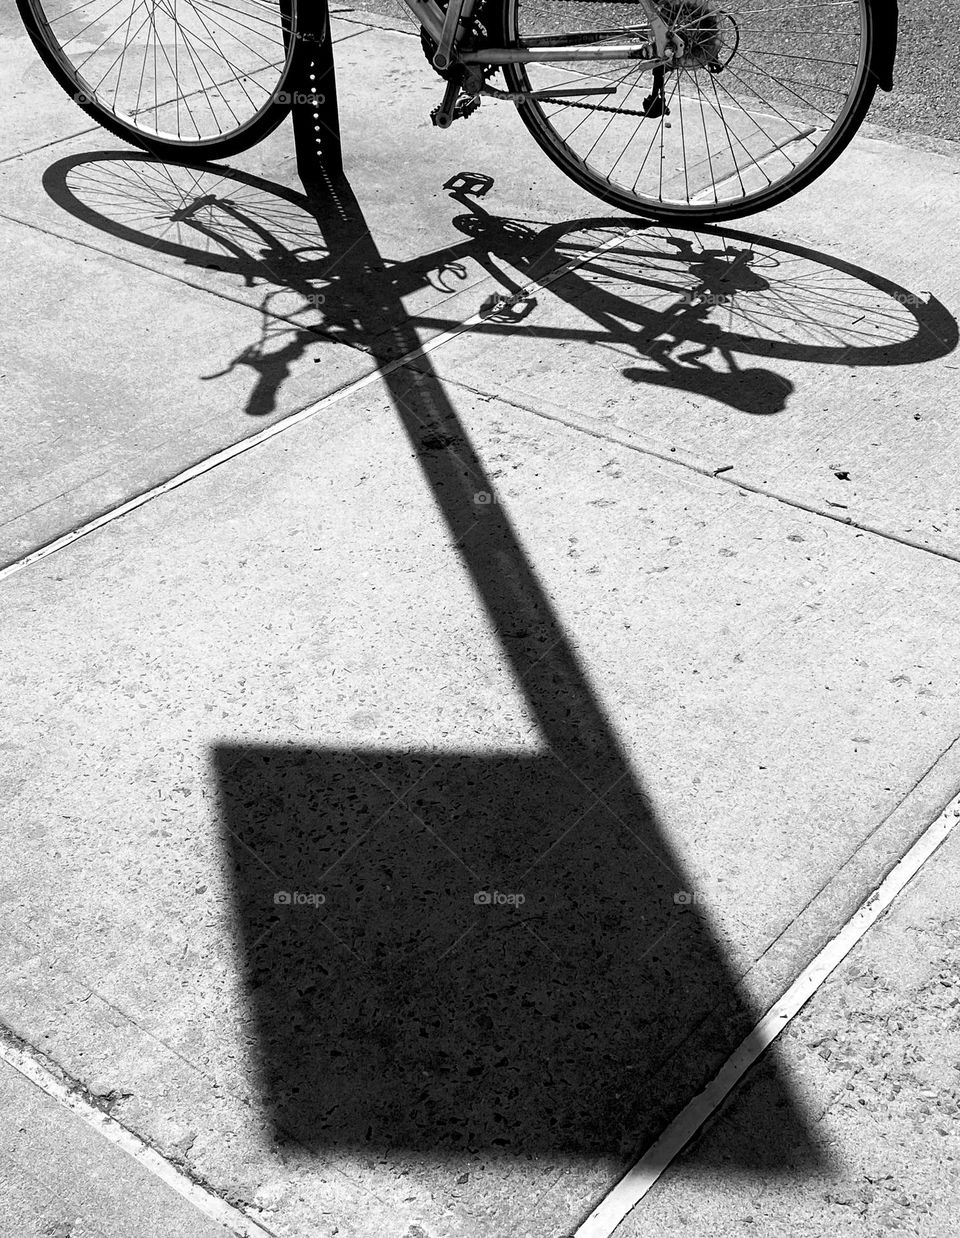 The shadow of the bike